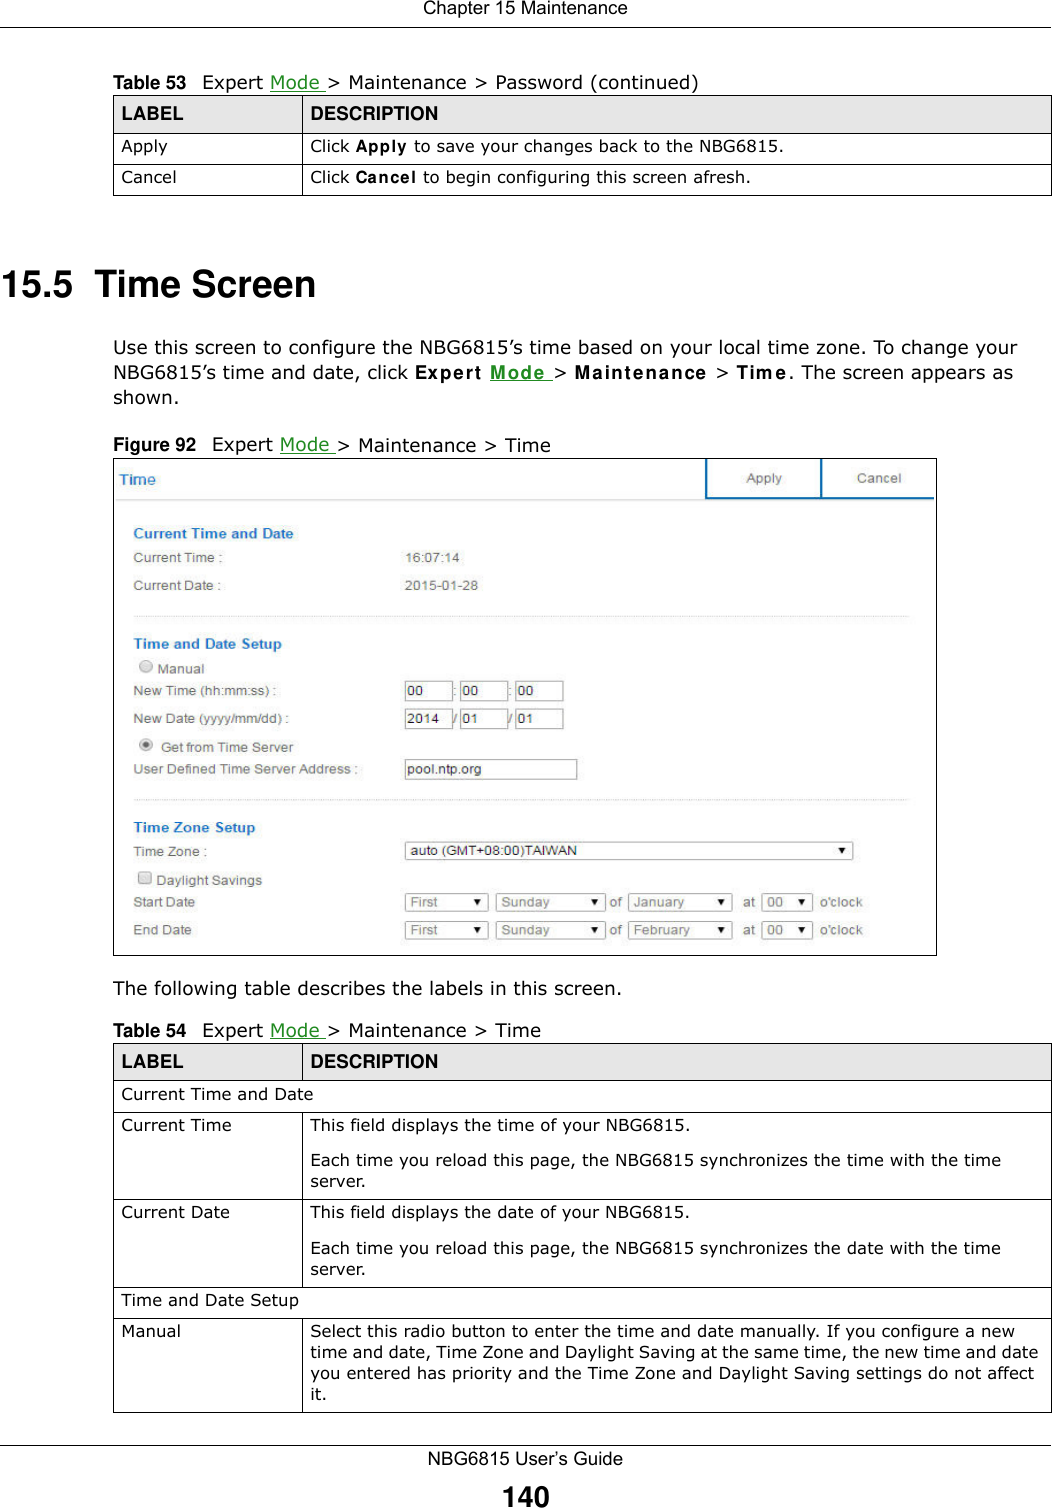 Chapter 15 MaintenanceNBG6815 User’s Guide14015.5  Time ScreenUse this screen to configure the NBG6815’s time based on your local time zone. To change your NBG6815’s time and date, click Expert Mode &gt; Maintenance &gt; Time. The screen appears as shown. Figure 92   Expert Mode &gt; Maintenance &gt; Time The following table describes the labels in this screen.Apply Click Apply to save your changes back to the NBG6815.Cancel Click Cancel to begin configuring this screen afresh.Table 53   Expert Mode &gt; Maintenance &gt; Password (continued)LABEL DESCRIPTIONTable 54   Expert Mode &gt; Maintenance &gt; Time  LABEL DESCRIPTIONCurrent Time and DateCurrent Time  This field displays the time of your NBG6815.Each time you reload this page, the NBG6815 synchronizes the time with the time server.Current Date  This field displays the date of your NBG6815. Each time you reload this page, the NBG6815 synchronizes the date with the time server.Time and Date SetupManual Select this radio button to enter the time and date manually. If you configure a new time and date, Time Zone and Daylight Saving at the same time, the new time and date you entered has priority and the Time Zone and Daylight Saving settings do not affect it.